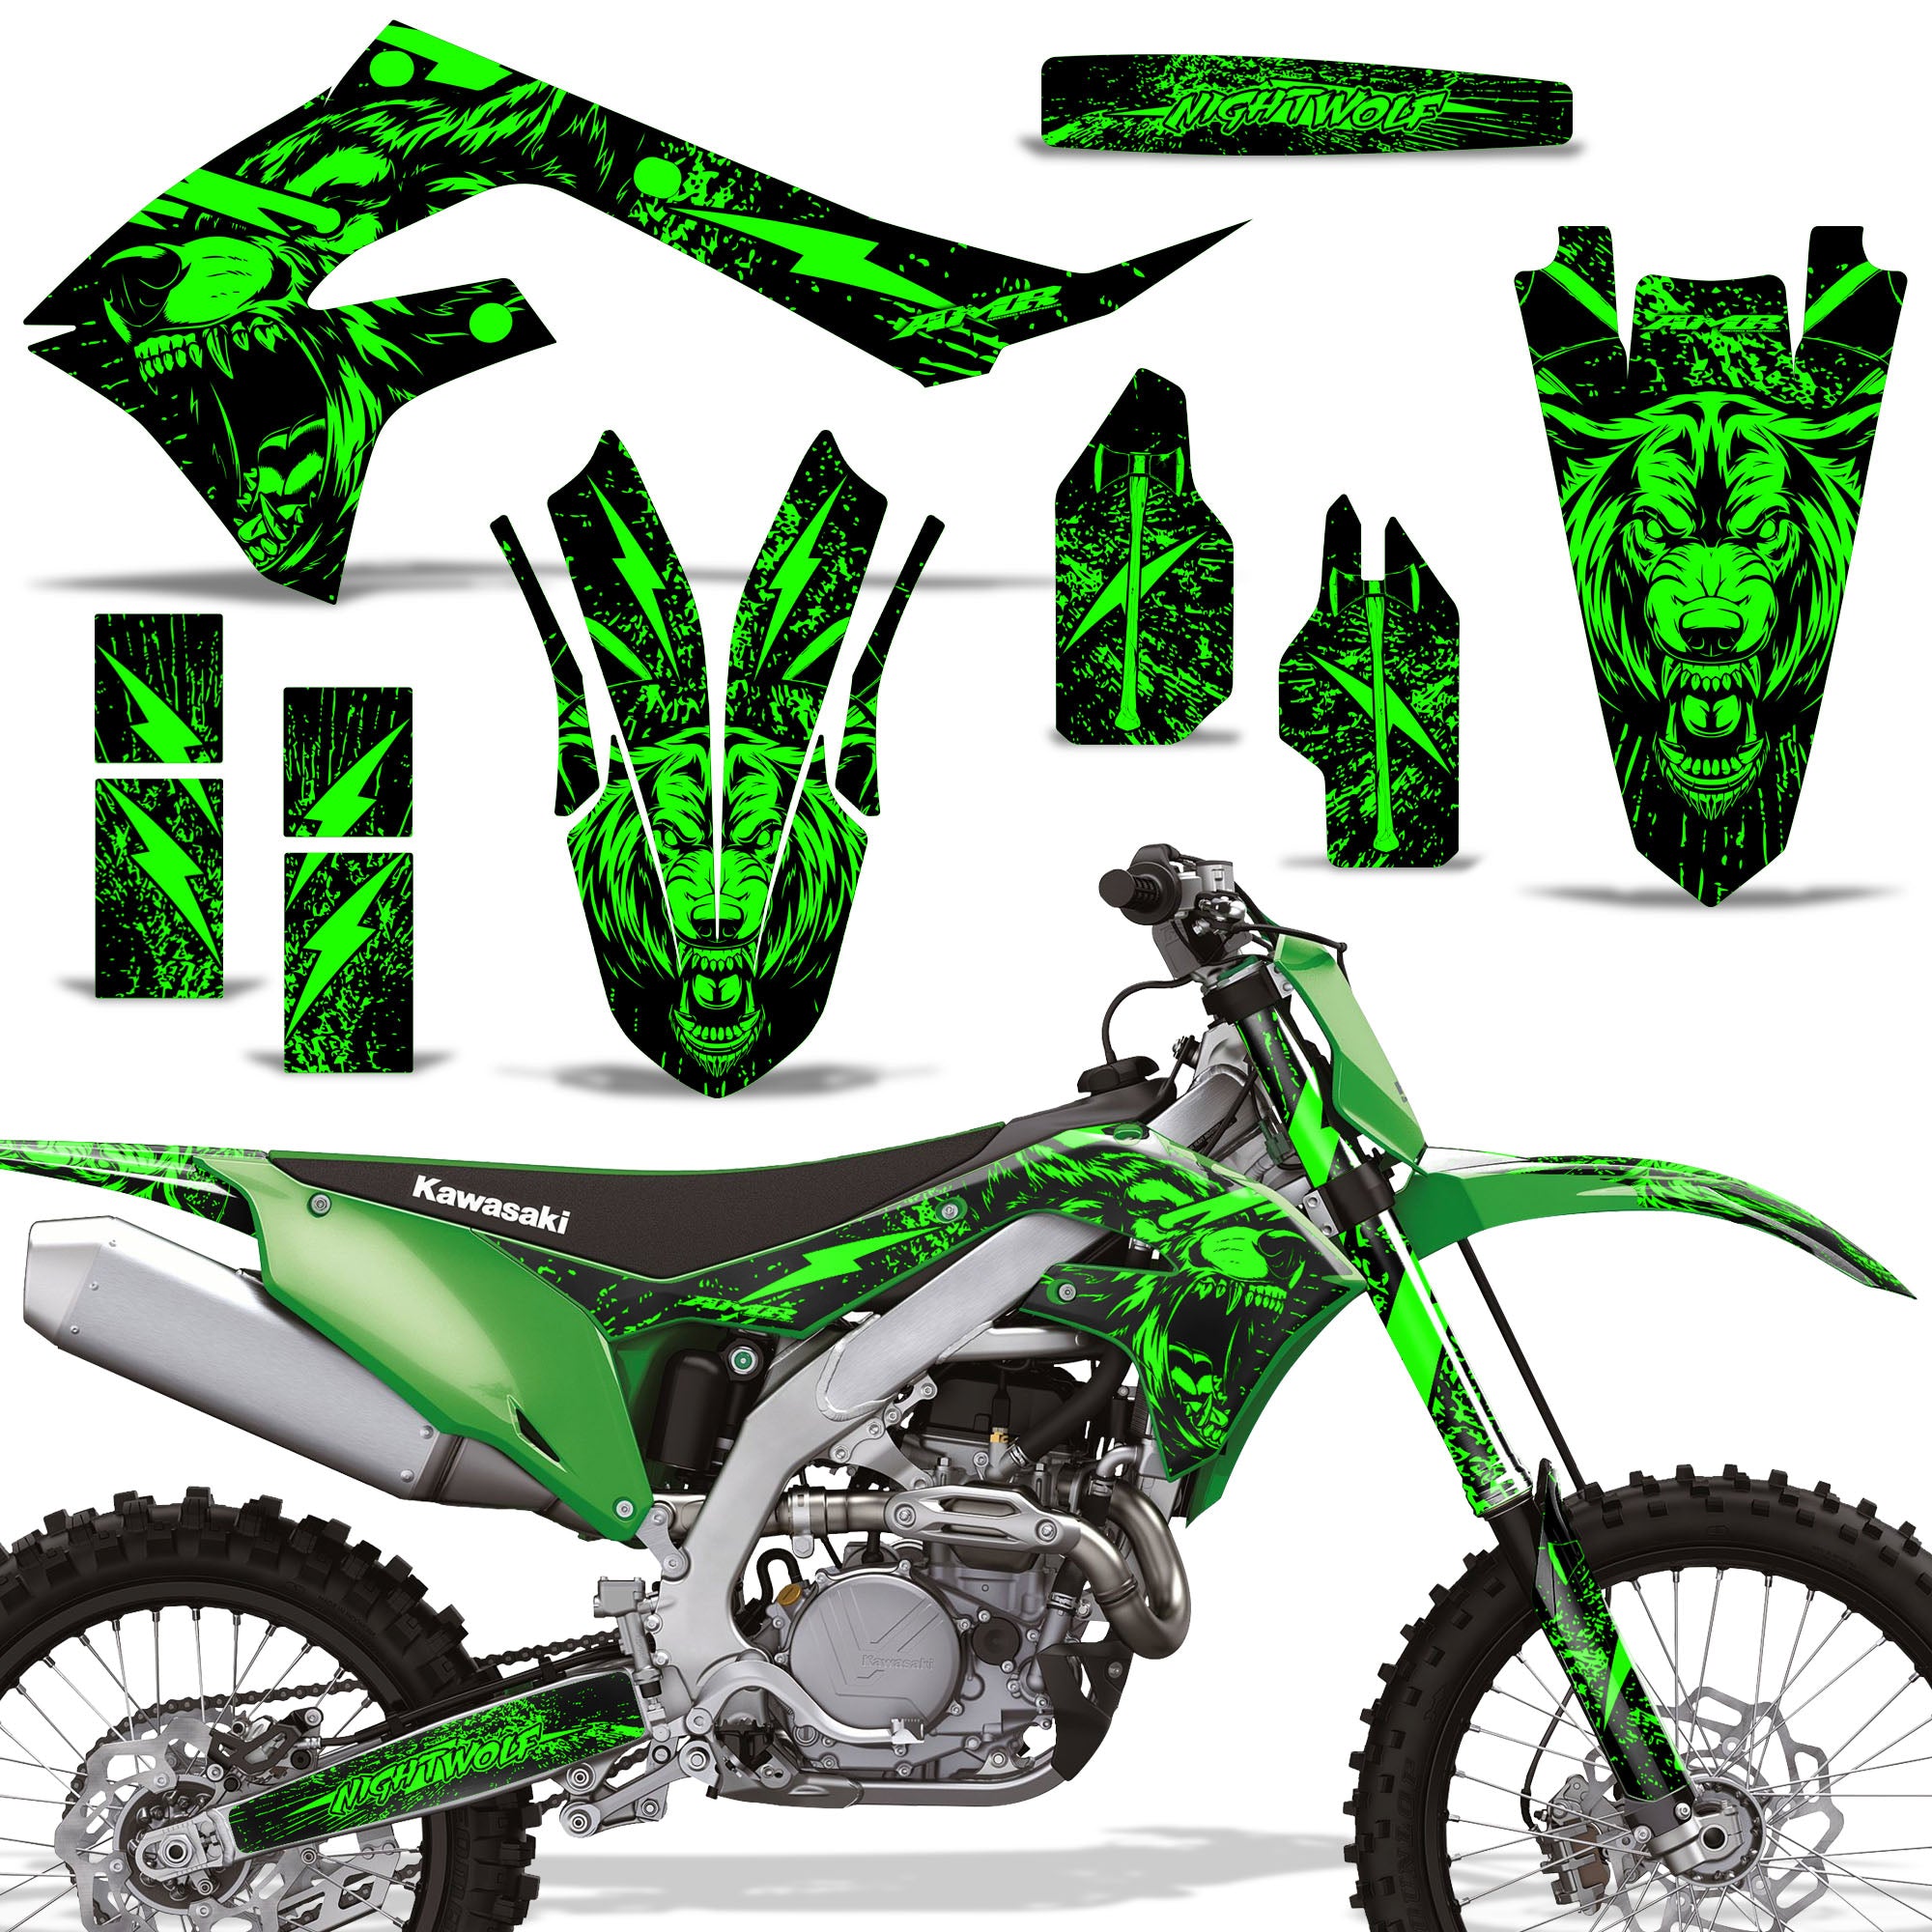 Kawasaki KXF 250 / 450 Graphics - Over 100 Designs to Choose From - Invision Artworks Powersports